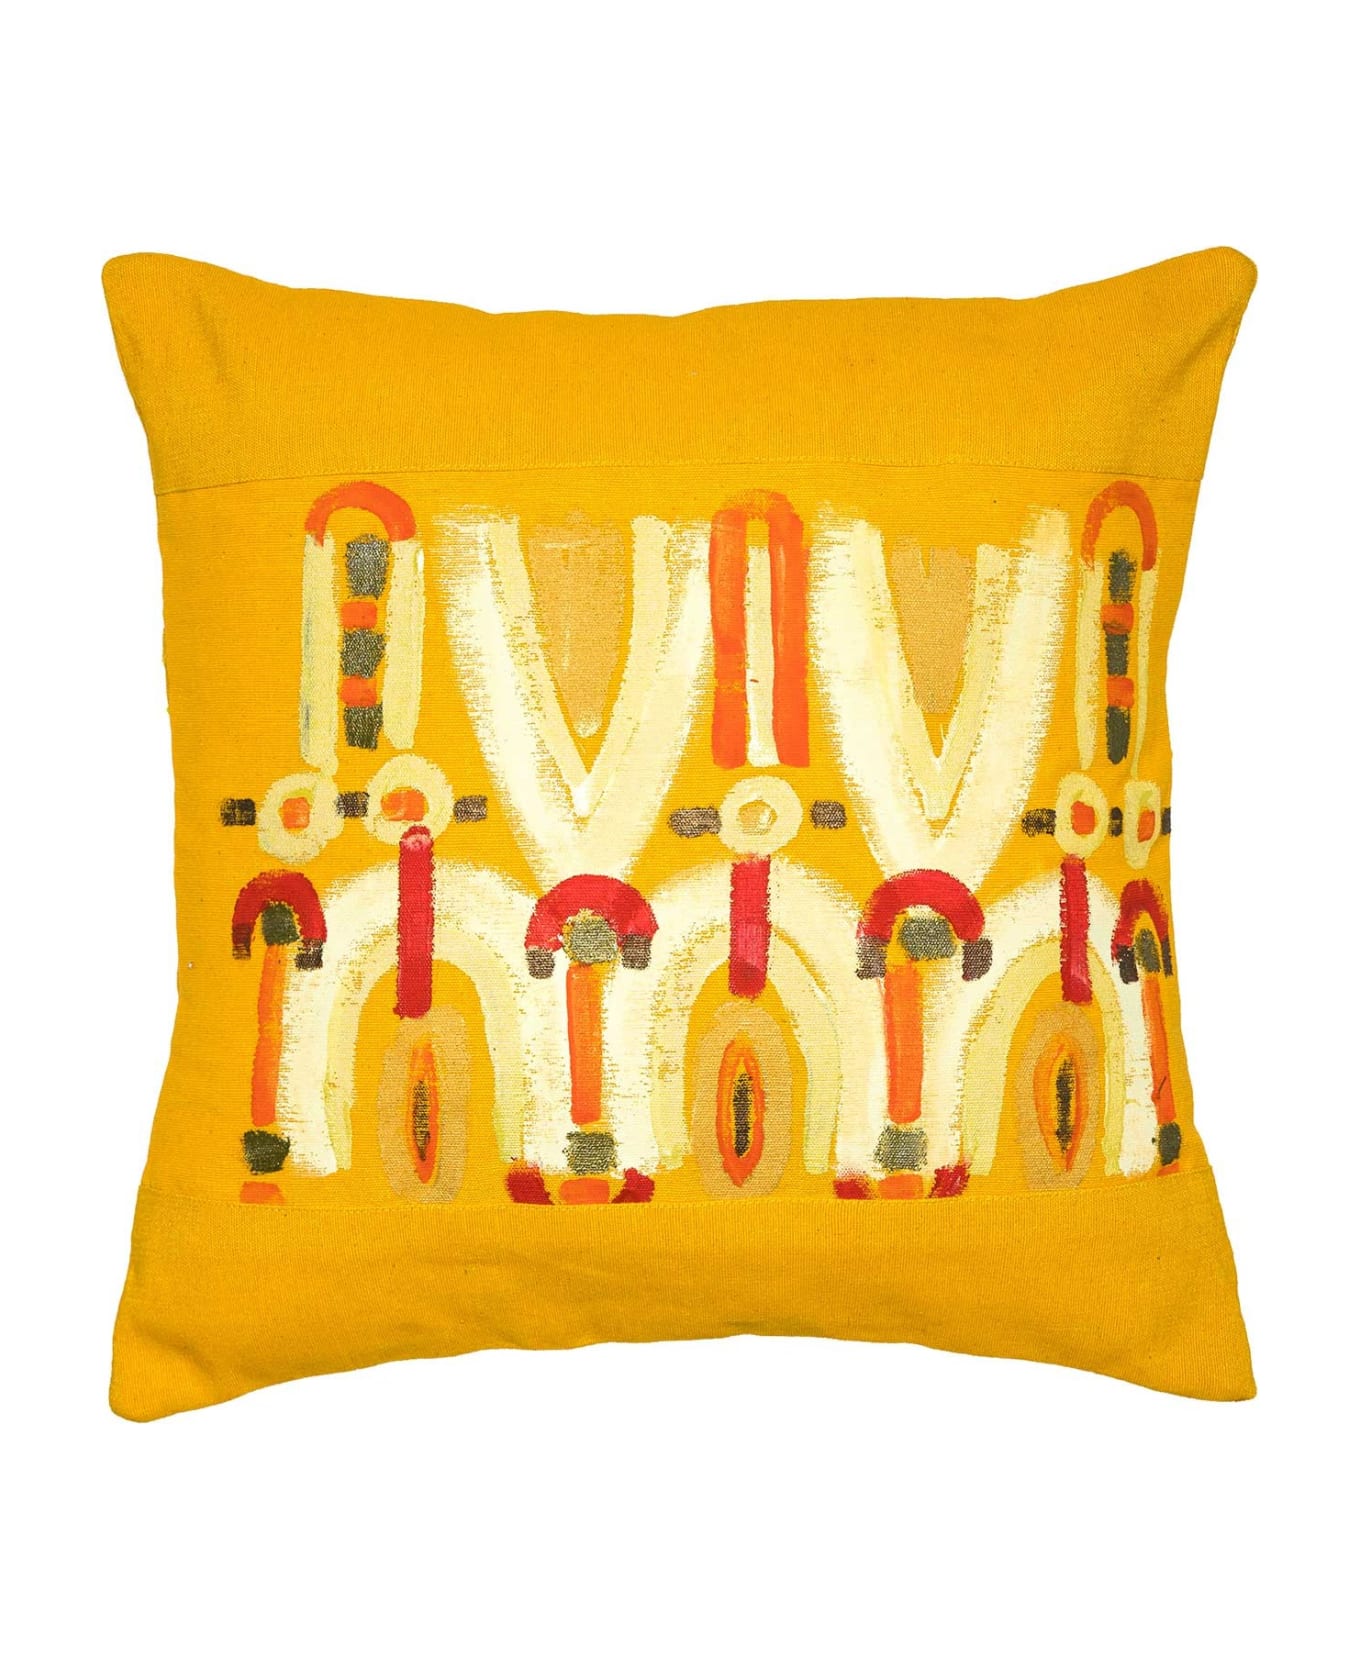 Le Botteghe su Gologone Cotton Hand Painted Indoor Cushion 40x40 cm - Yellow Fantasy